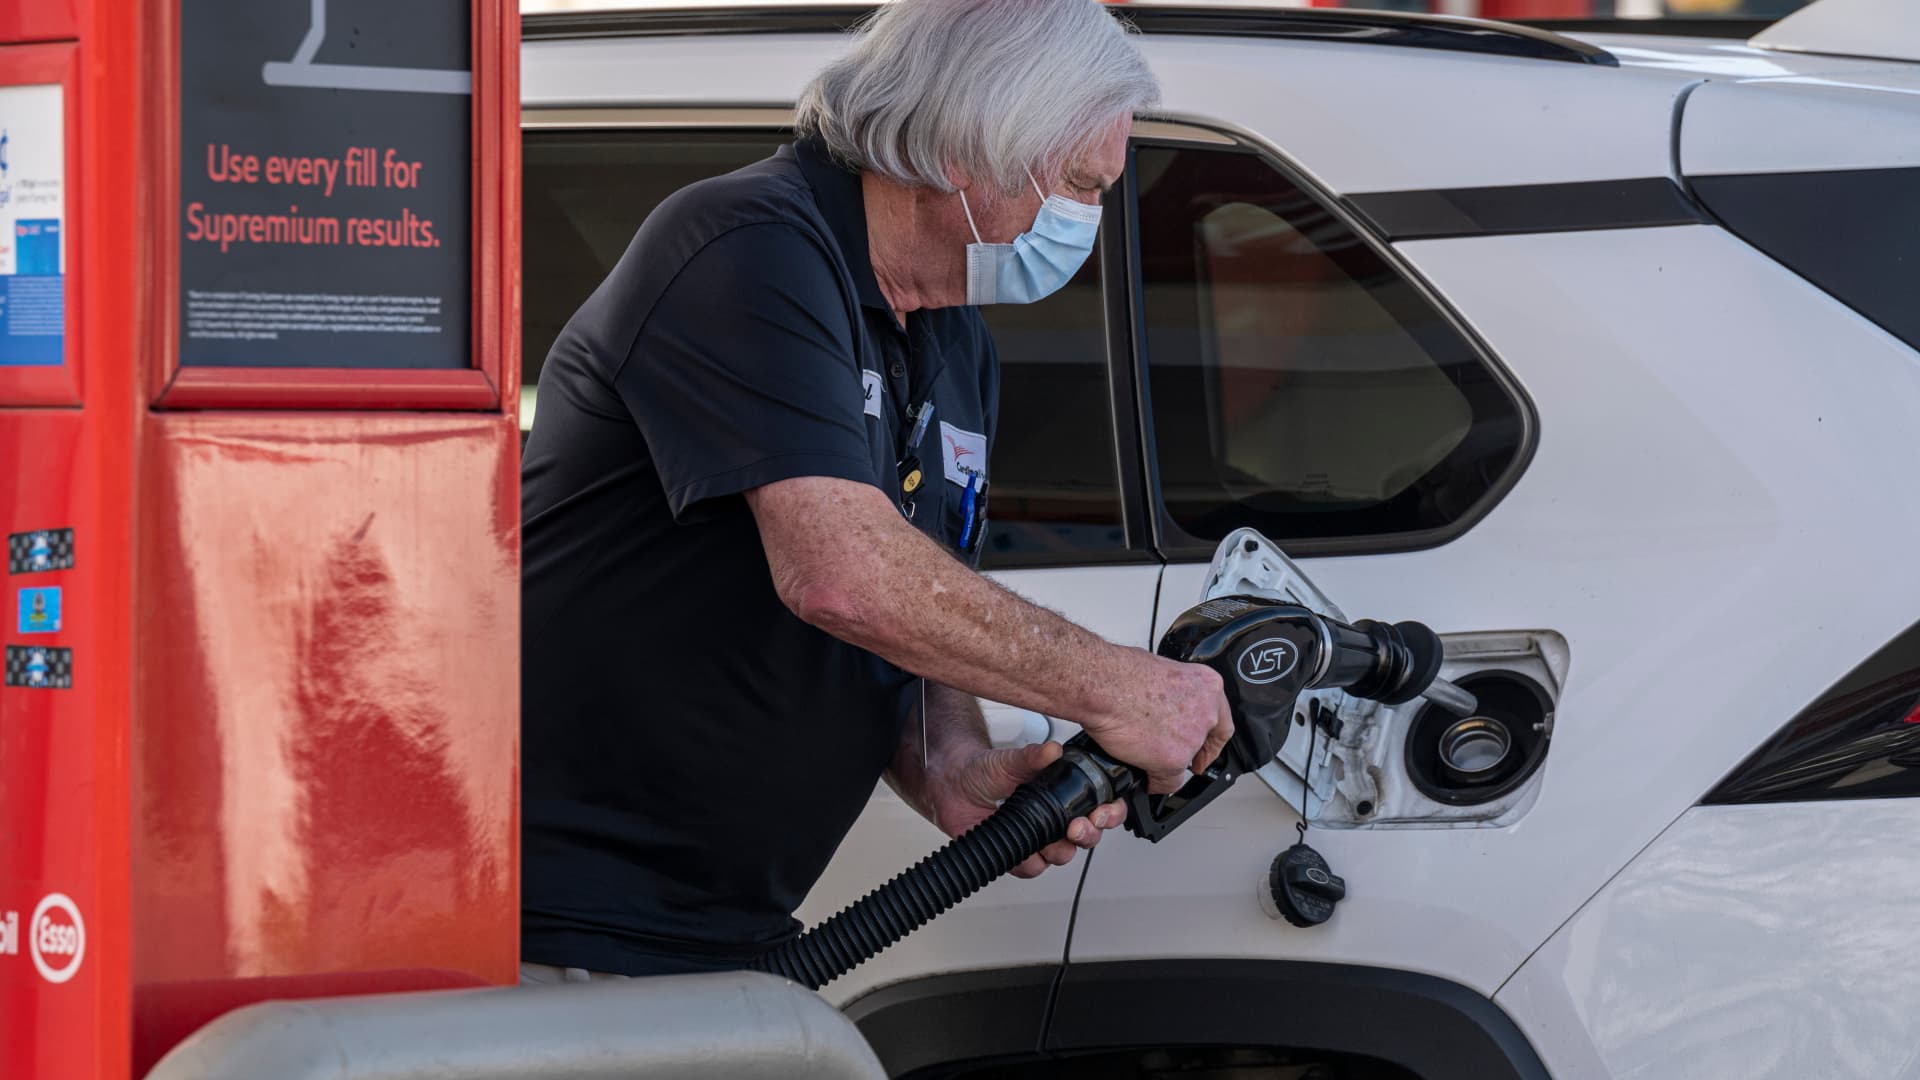 A driver fuels a vehicle a gas station in Richmond, California, on March 24, 2022.